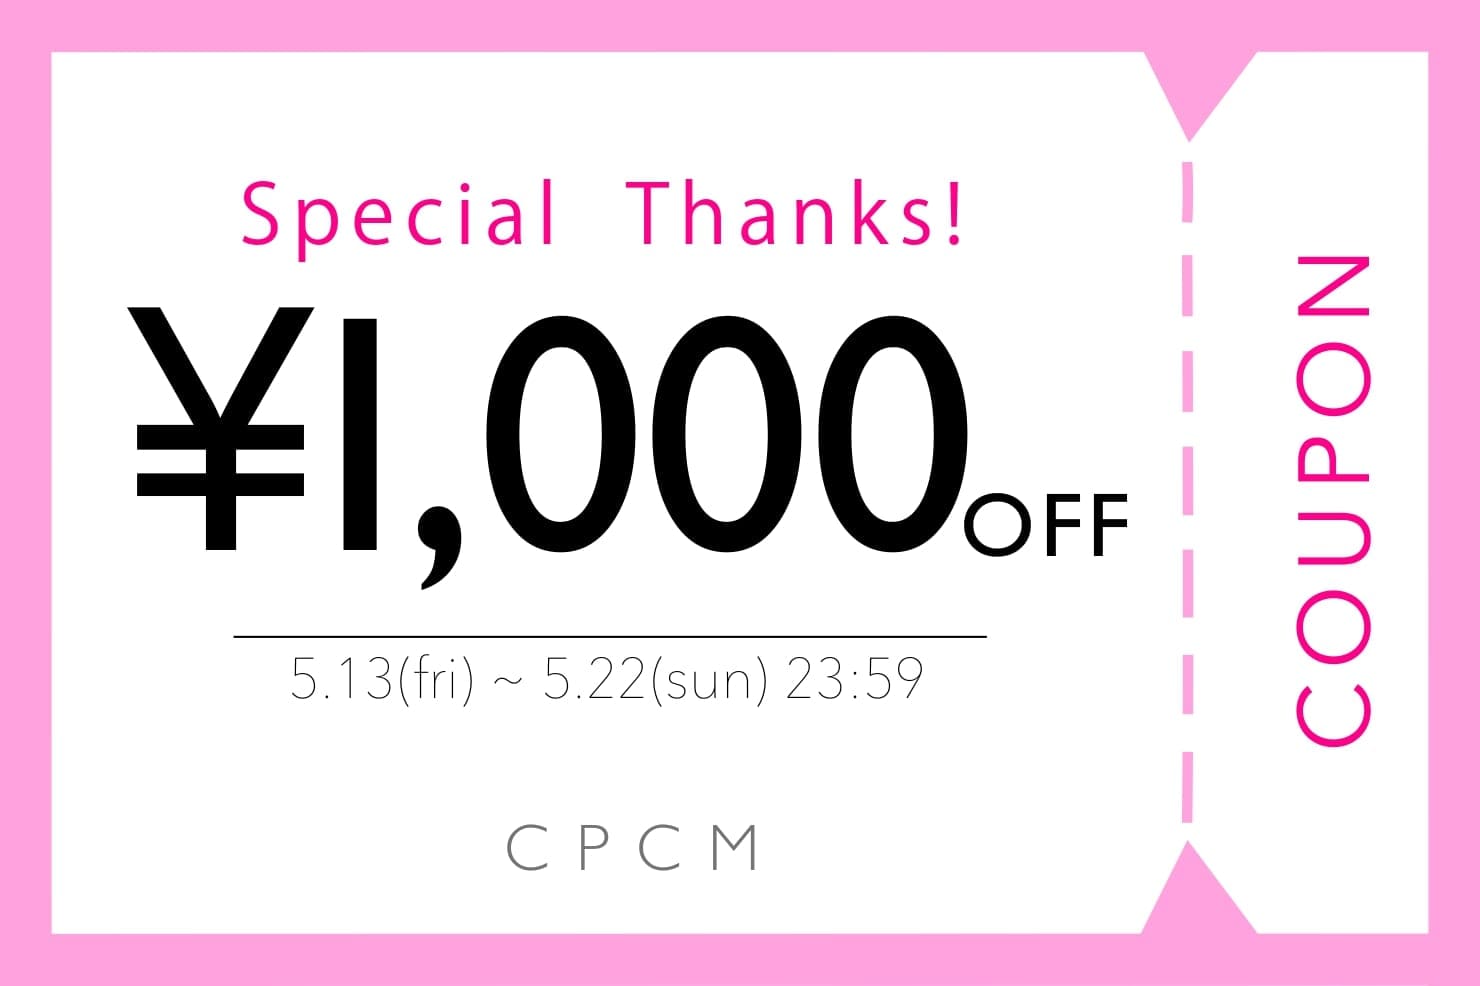 【CPCM】Special Thanks ￥1,000円OFFクーポン